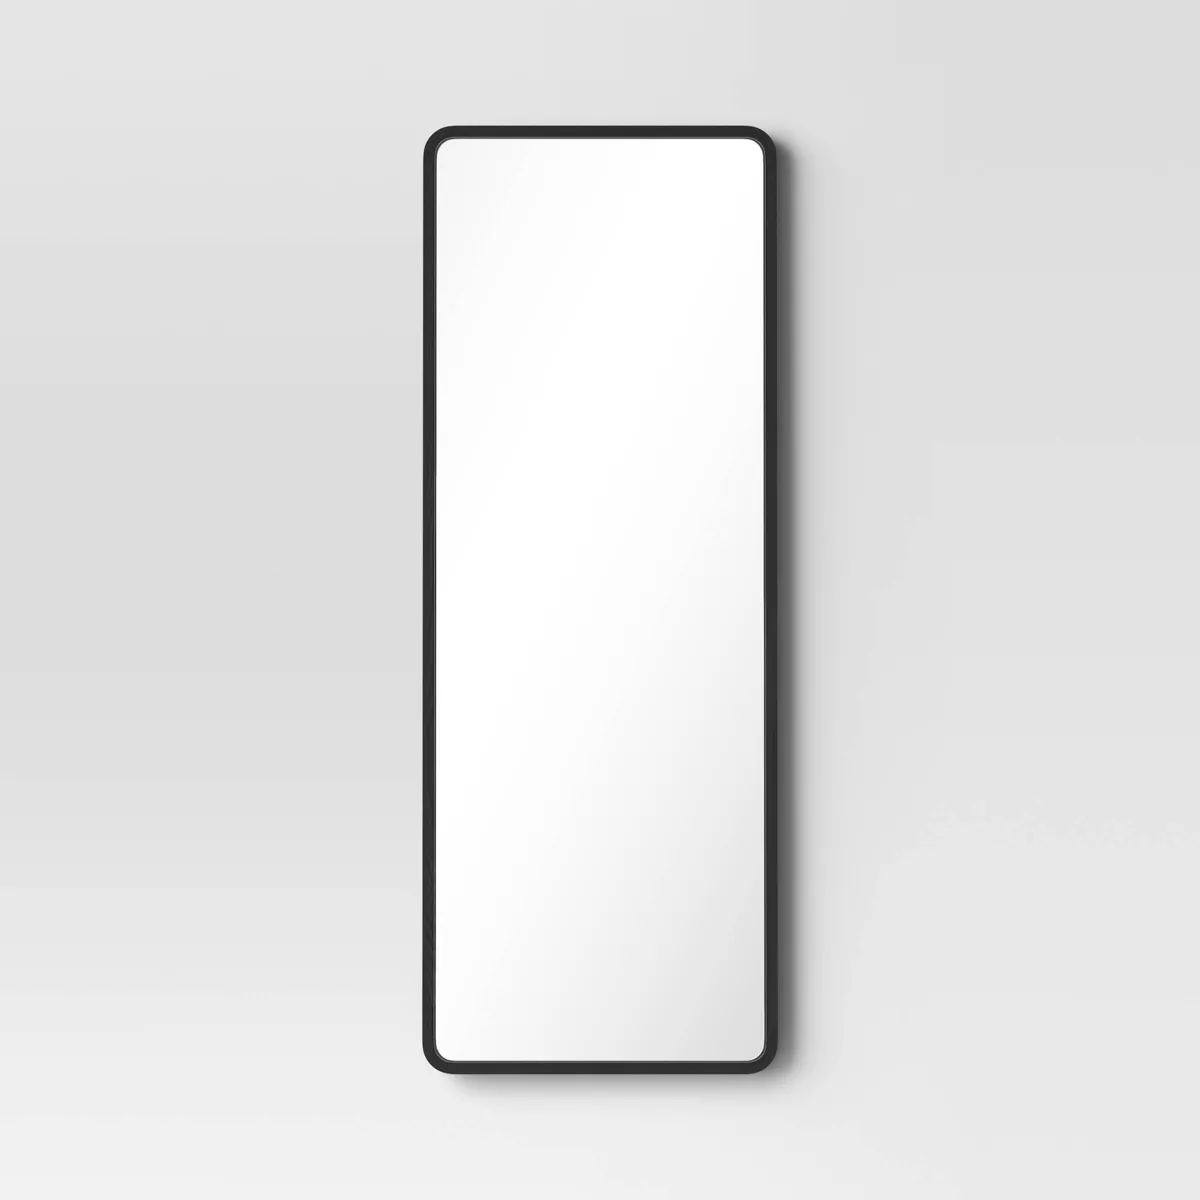 Rounded corner leaner mirror at